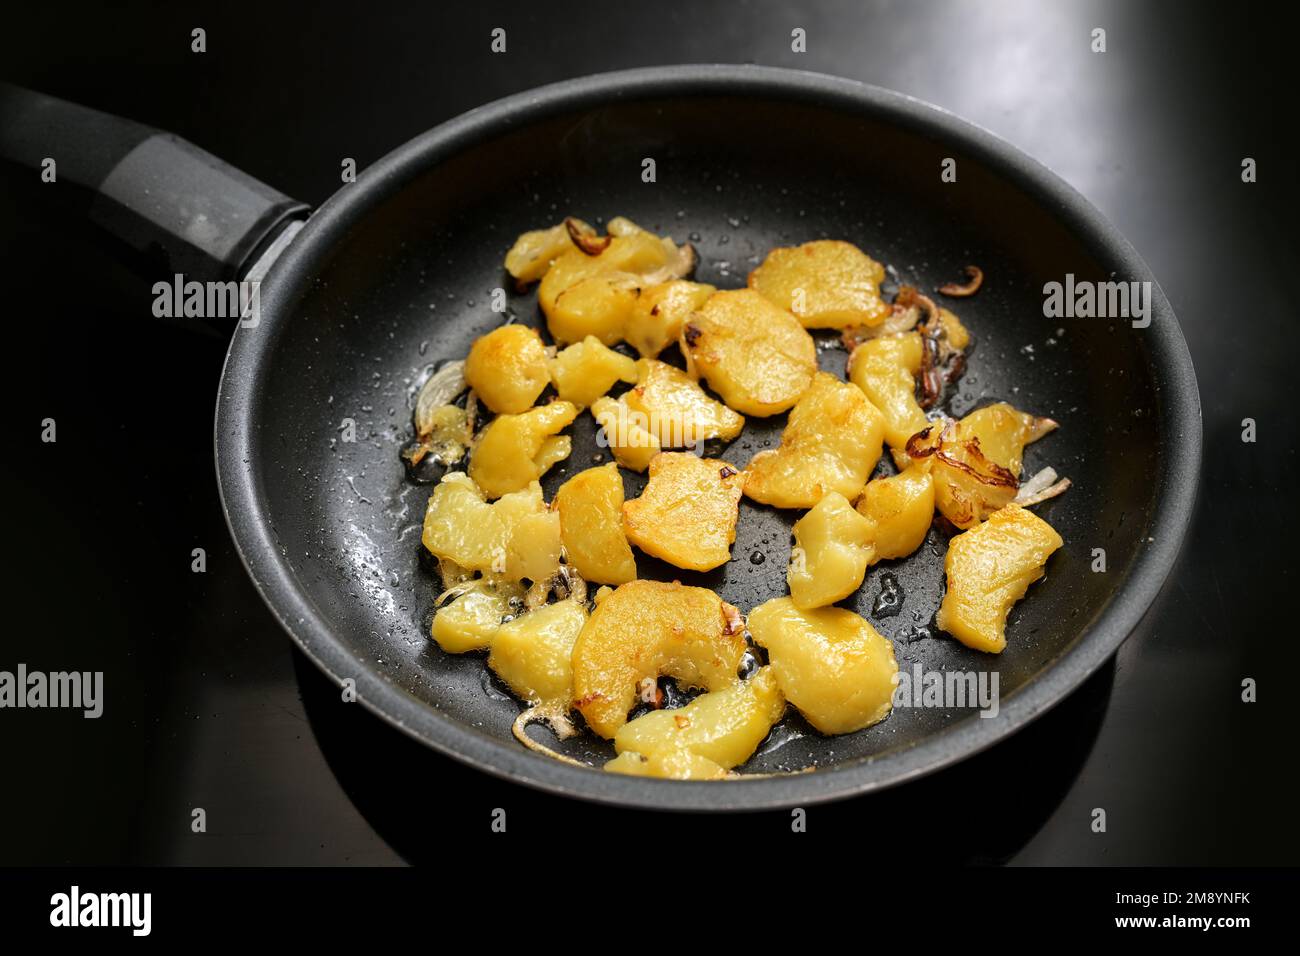 Potato slices and onion are roasted in a black frying pan on the stove, in Germany called Bratkartoffeln, food and cooking theme, selected focus, narr Stock Photo